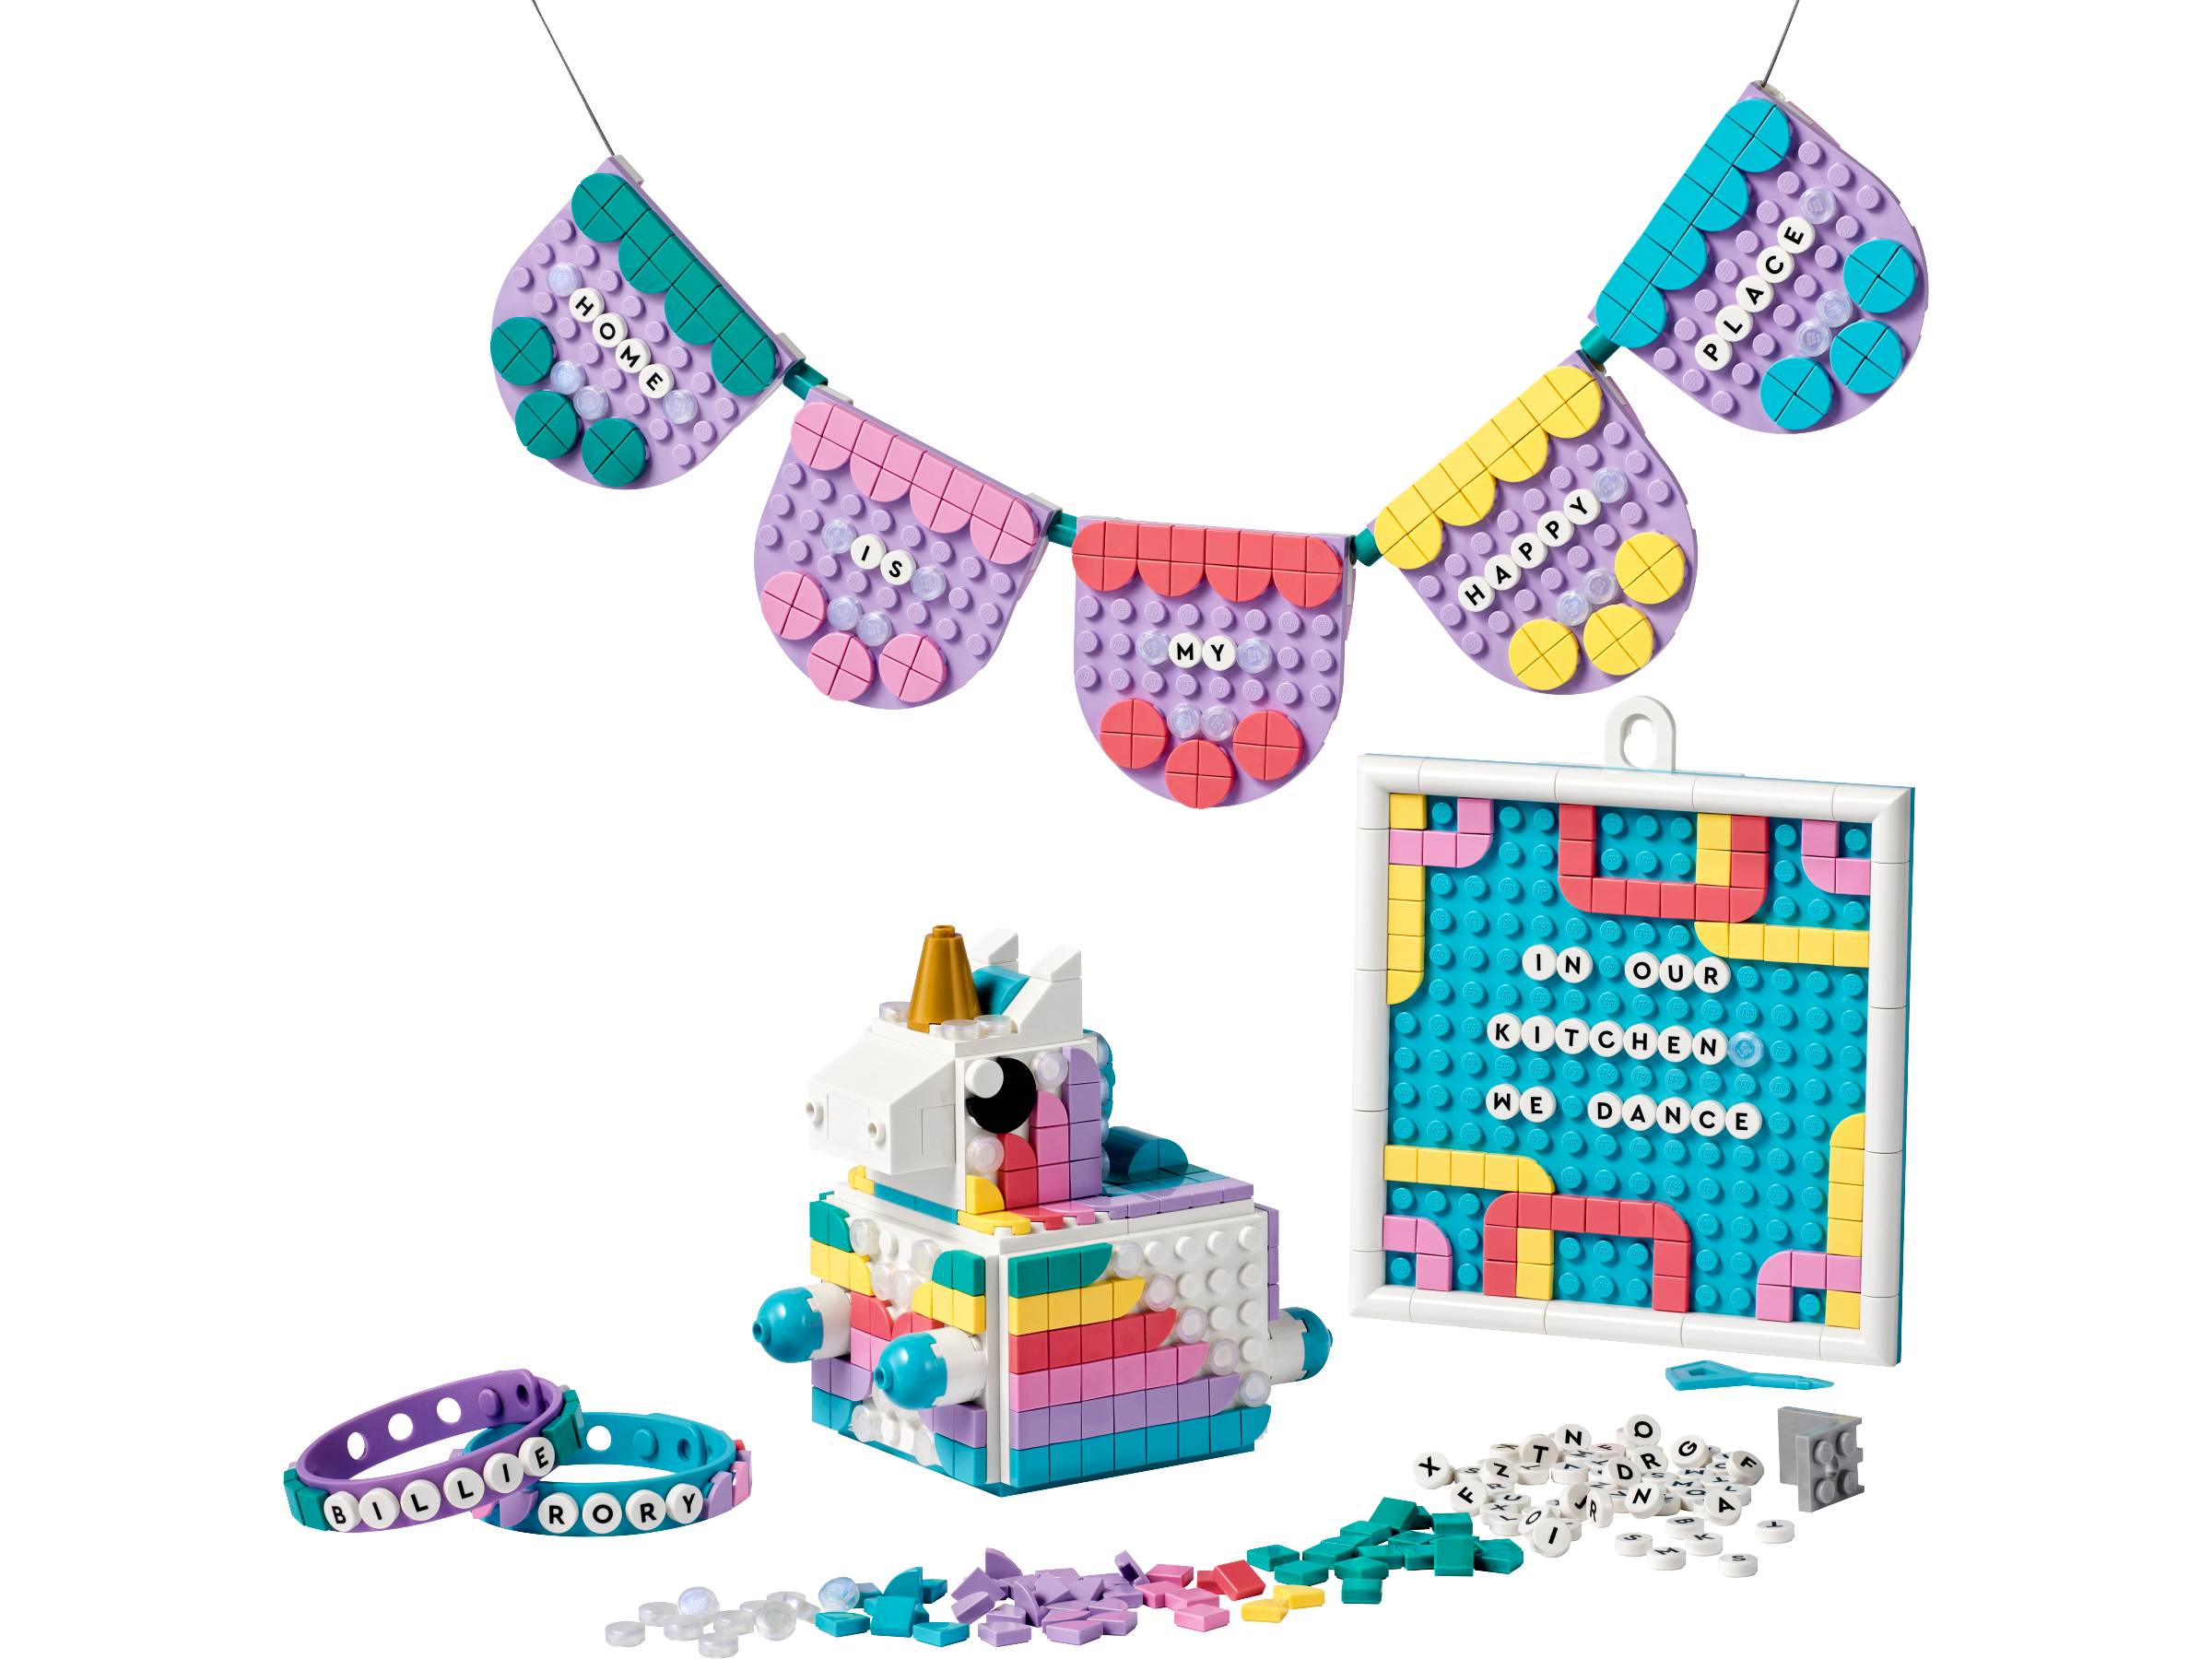 Unicorn Creative Family Pack 41962 | DOTS | Buy online at the Official LEGO®  Shop US